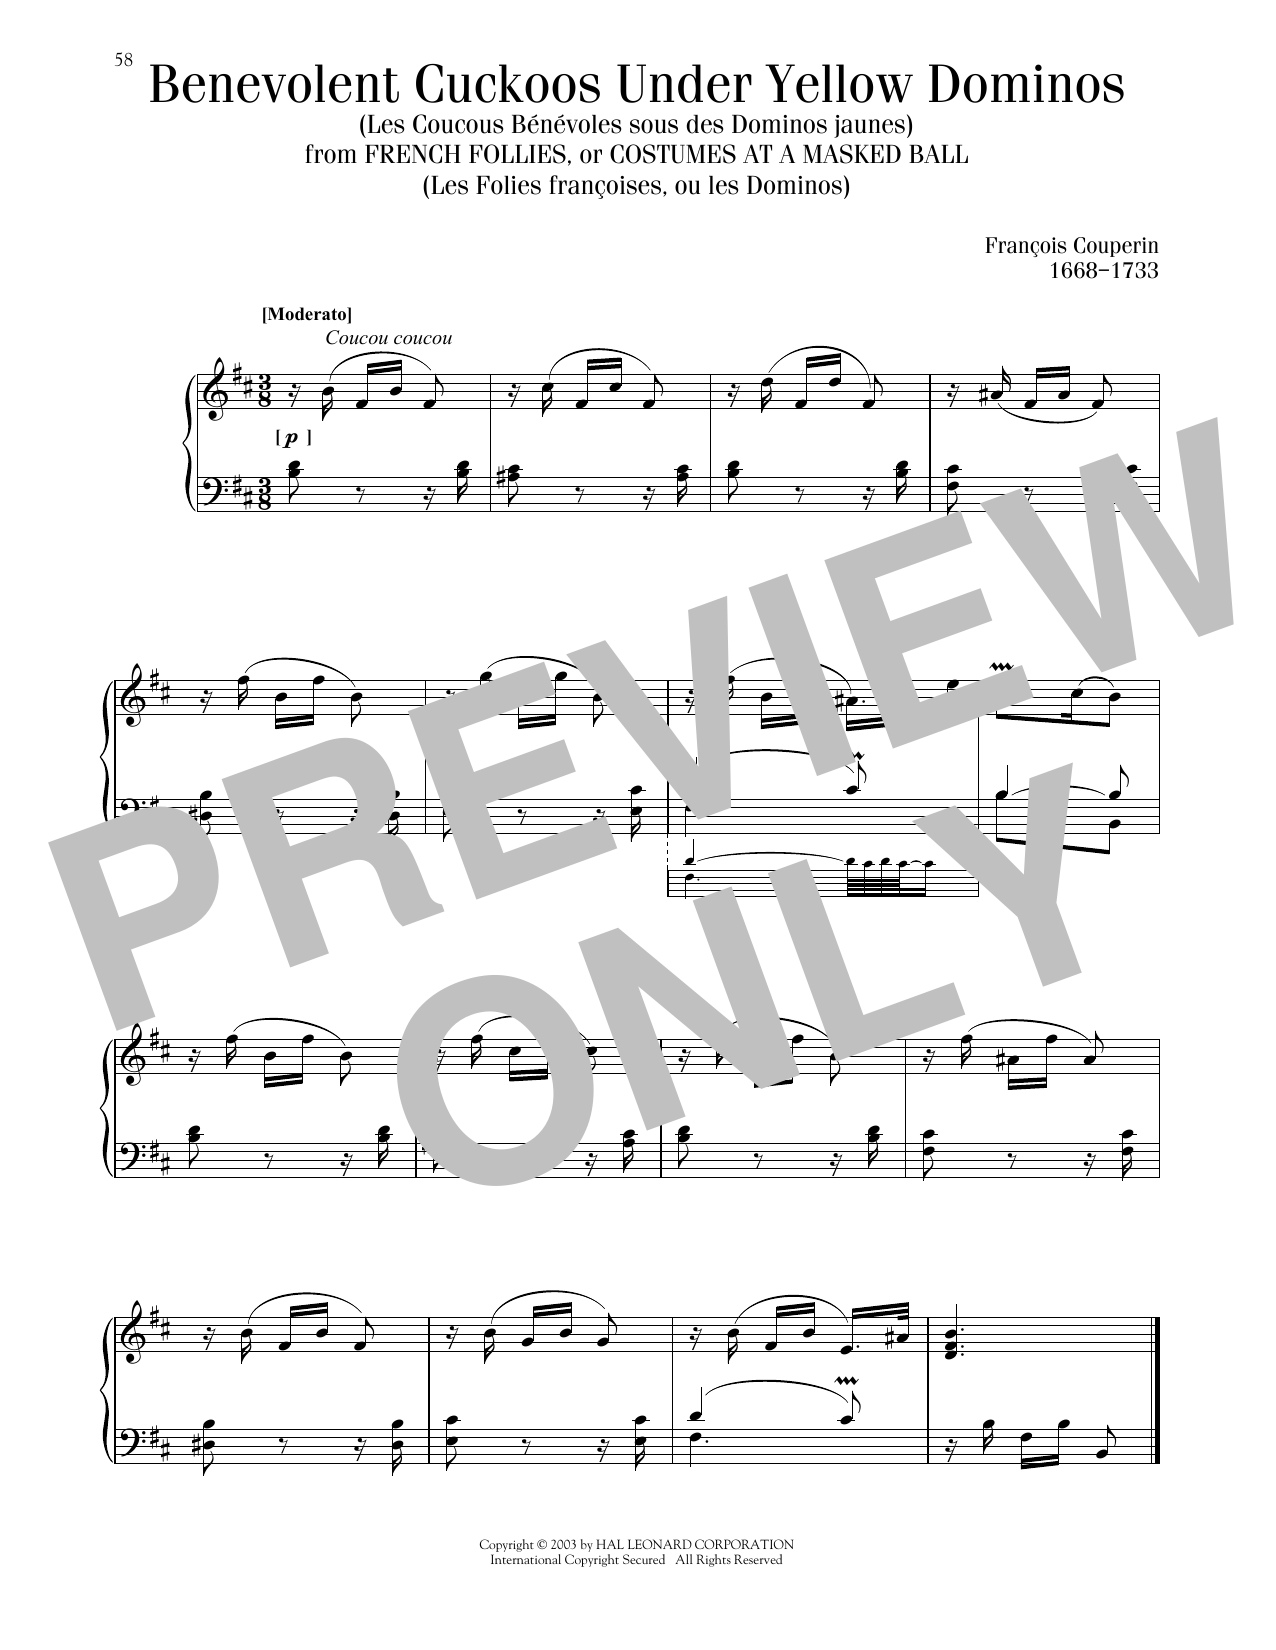 Francois Couperin Benevolent Cuckoos Under Yellow Dominos sheet music notes printable PDF score